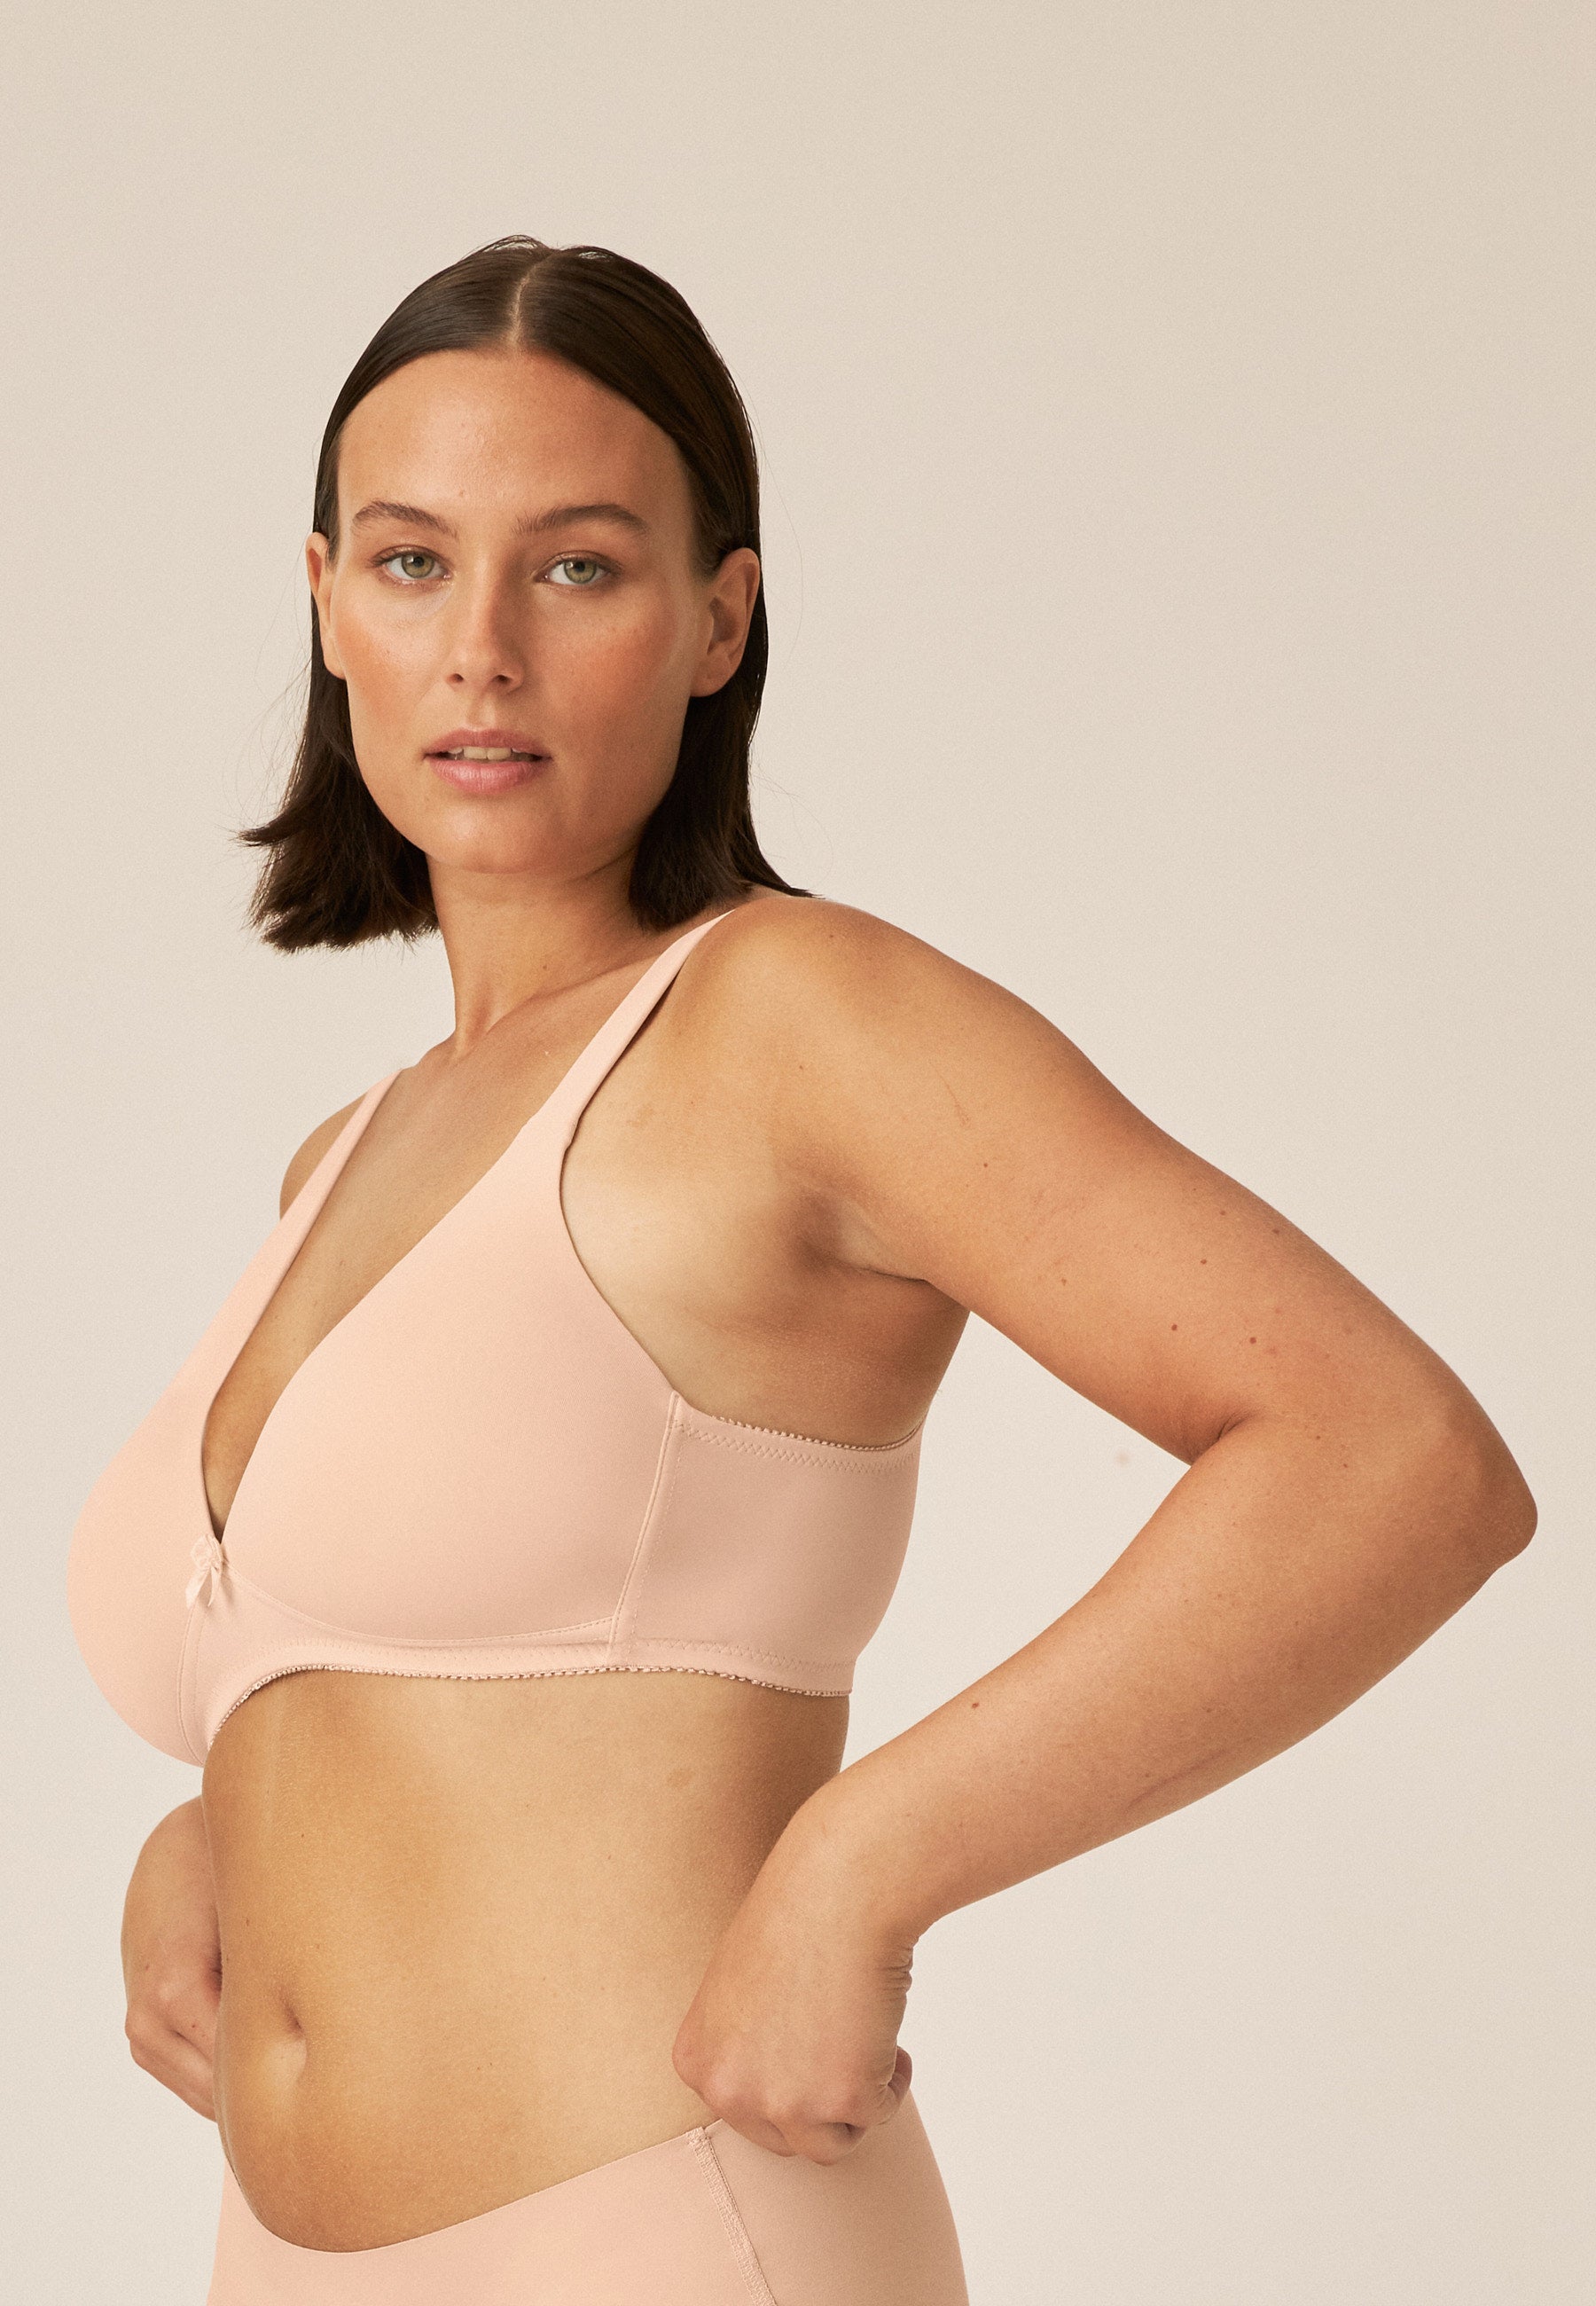 Soft Bra with Cup and Relief Straps - Light Beige